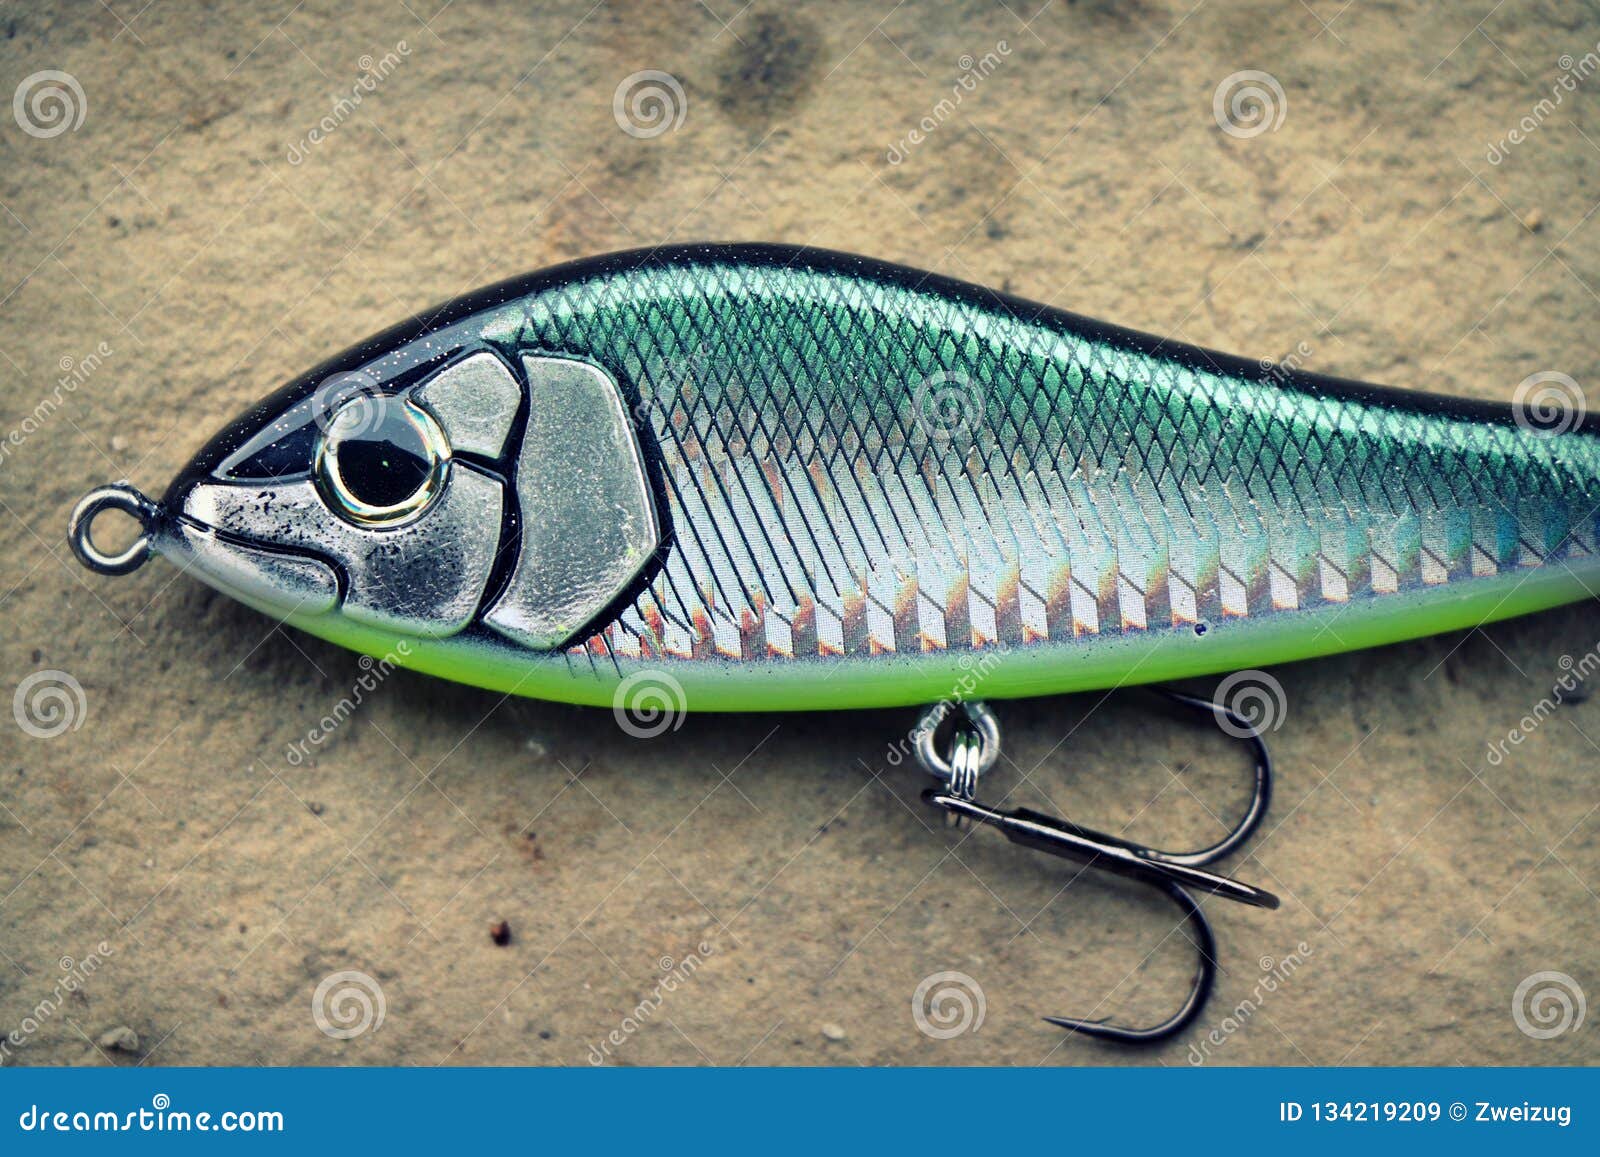 https://thumbs.dreamstime.com/z/large-savage-gear-lure-primarily-used-fishing-large-species-fish-such-as-muskie-big-bass-pike-large-heavy-fishing-134219209.jpg